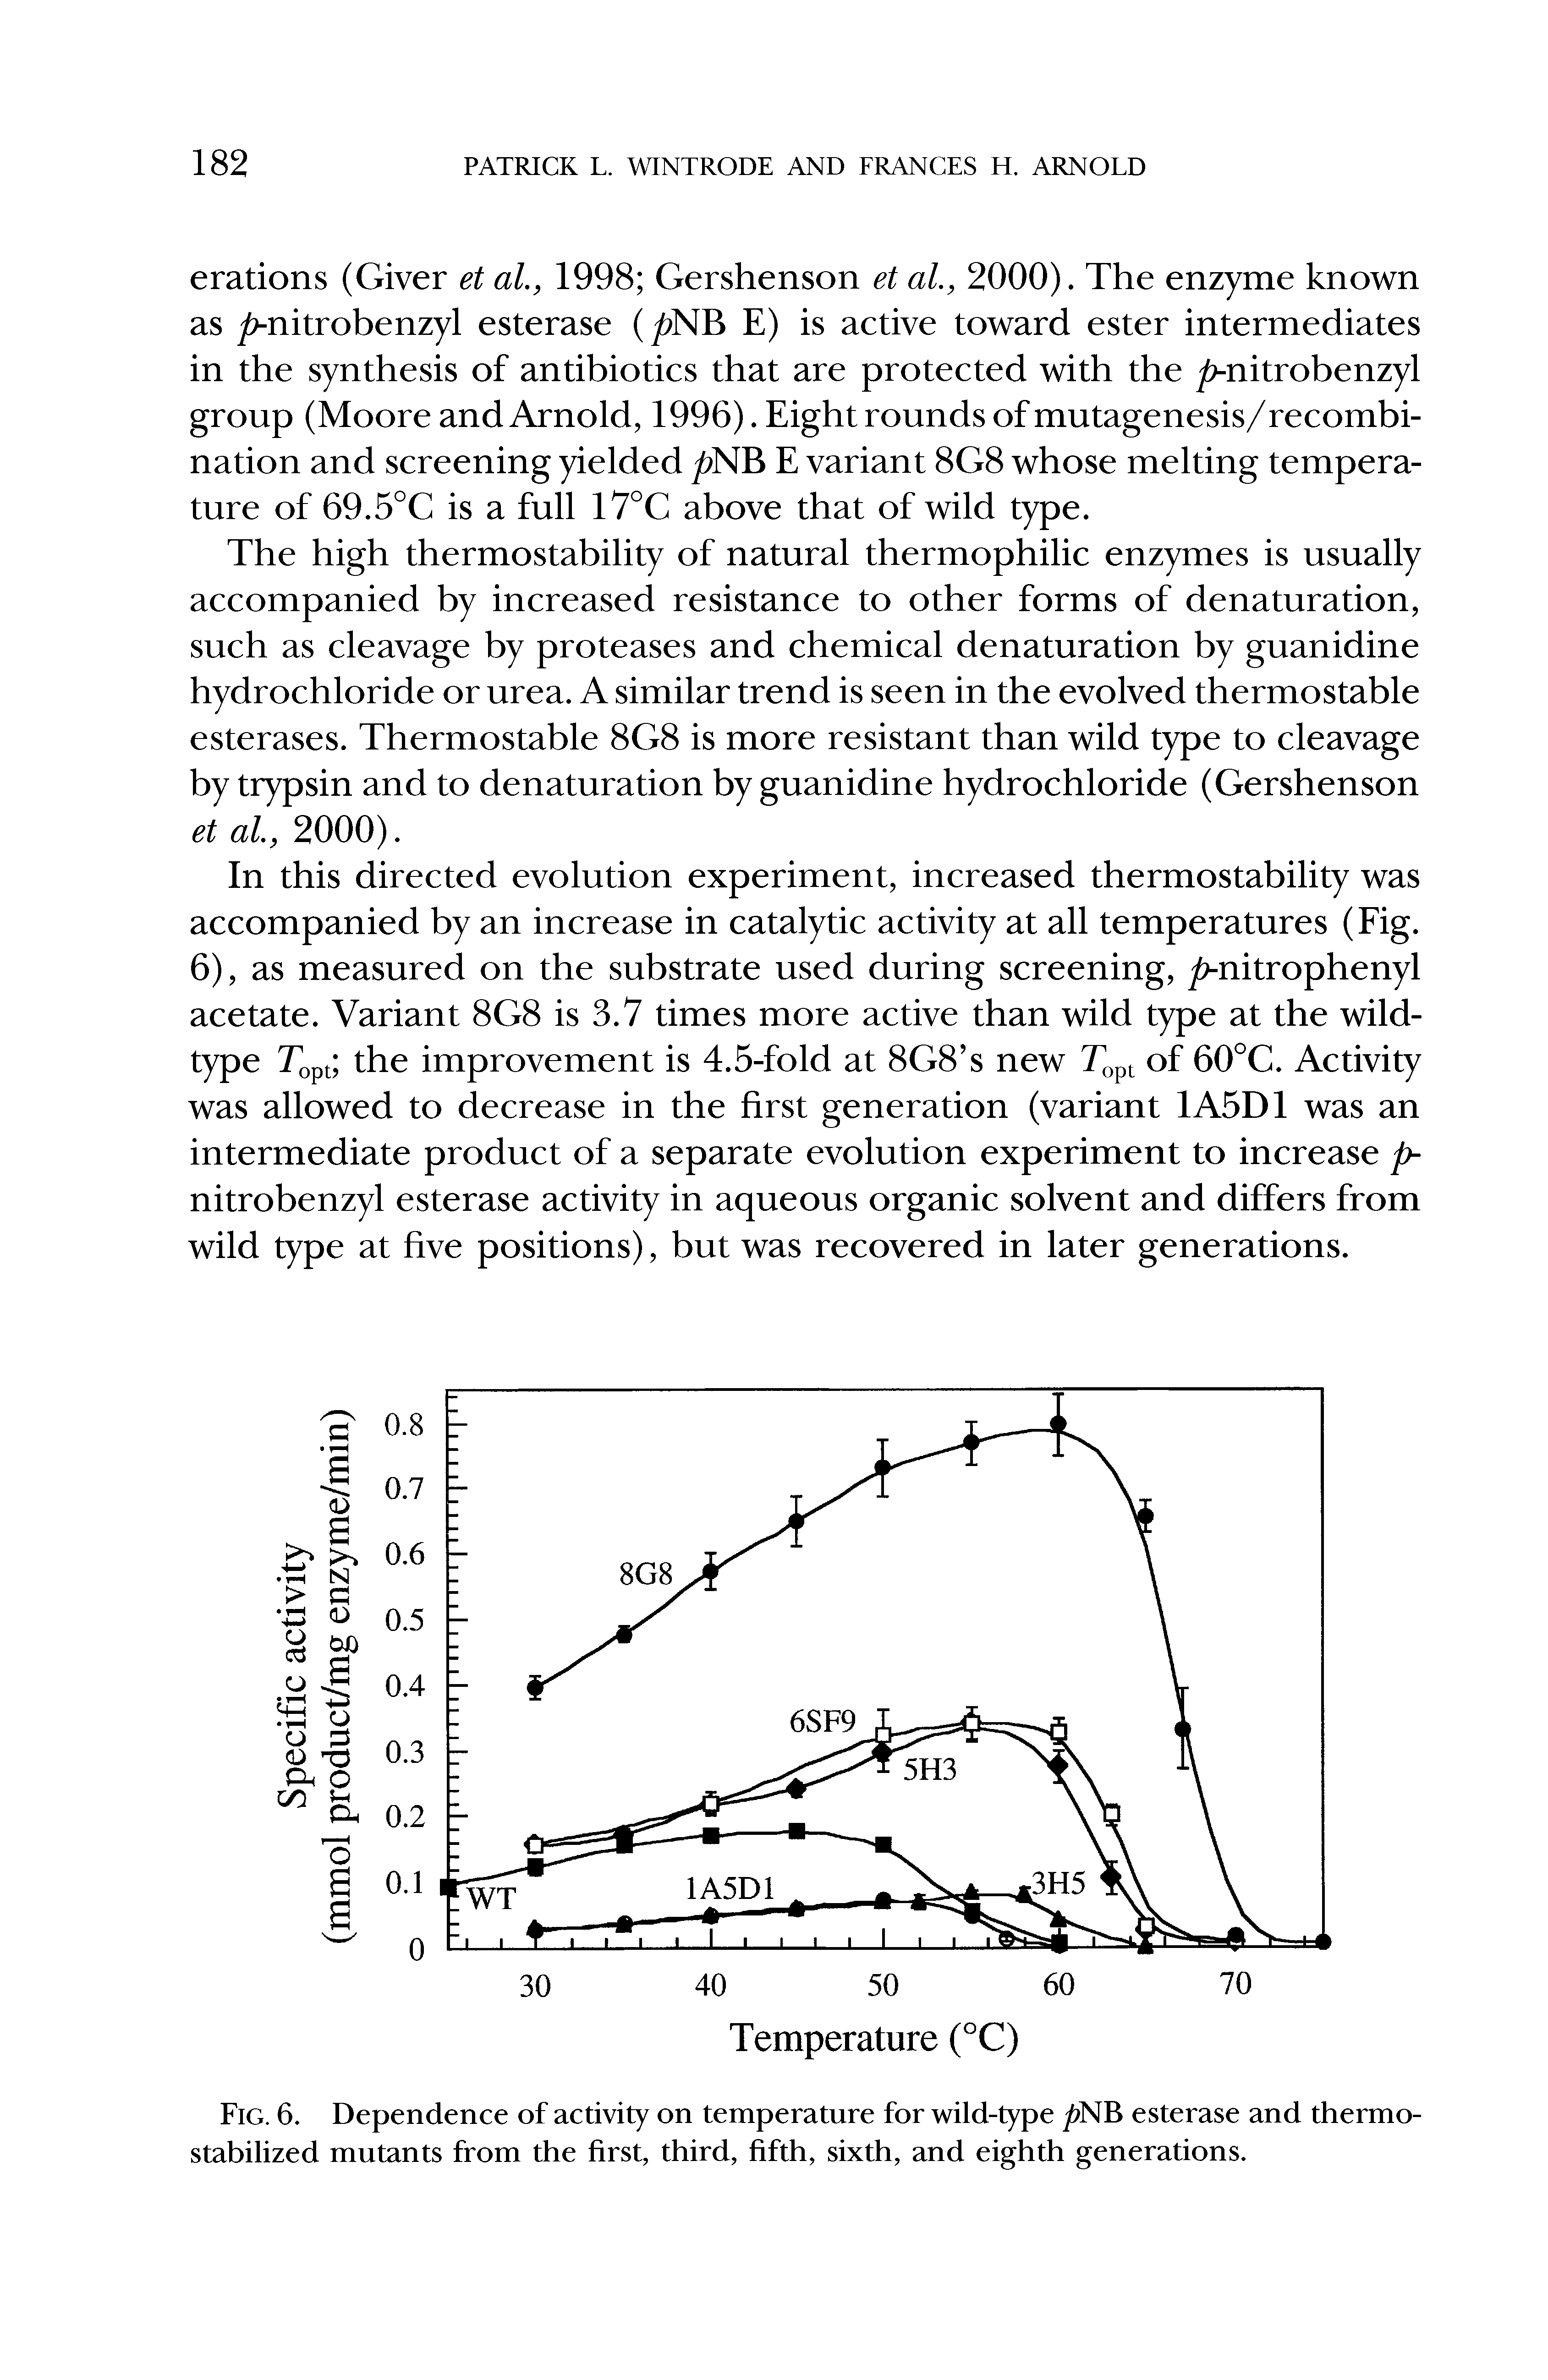 Fig. 6. Dependence of activity on temperature for wild-type jfrNB esterase and thermo-stabilized mutants from the first, third, fifth, sixth, and eighth generations.